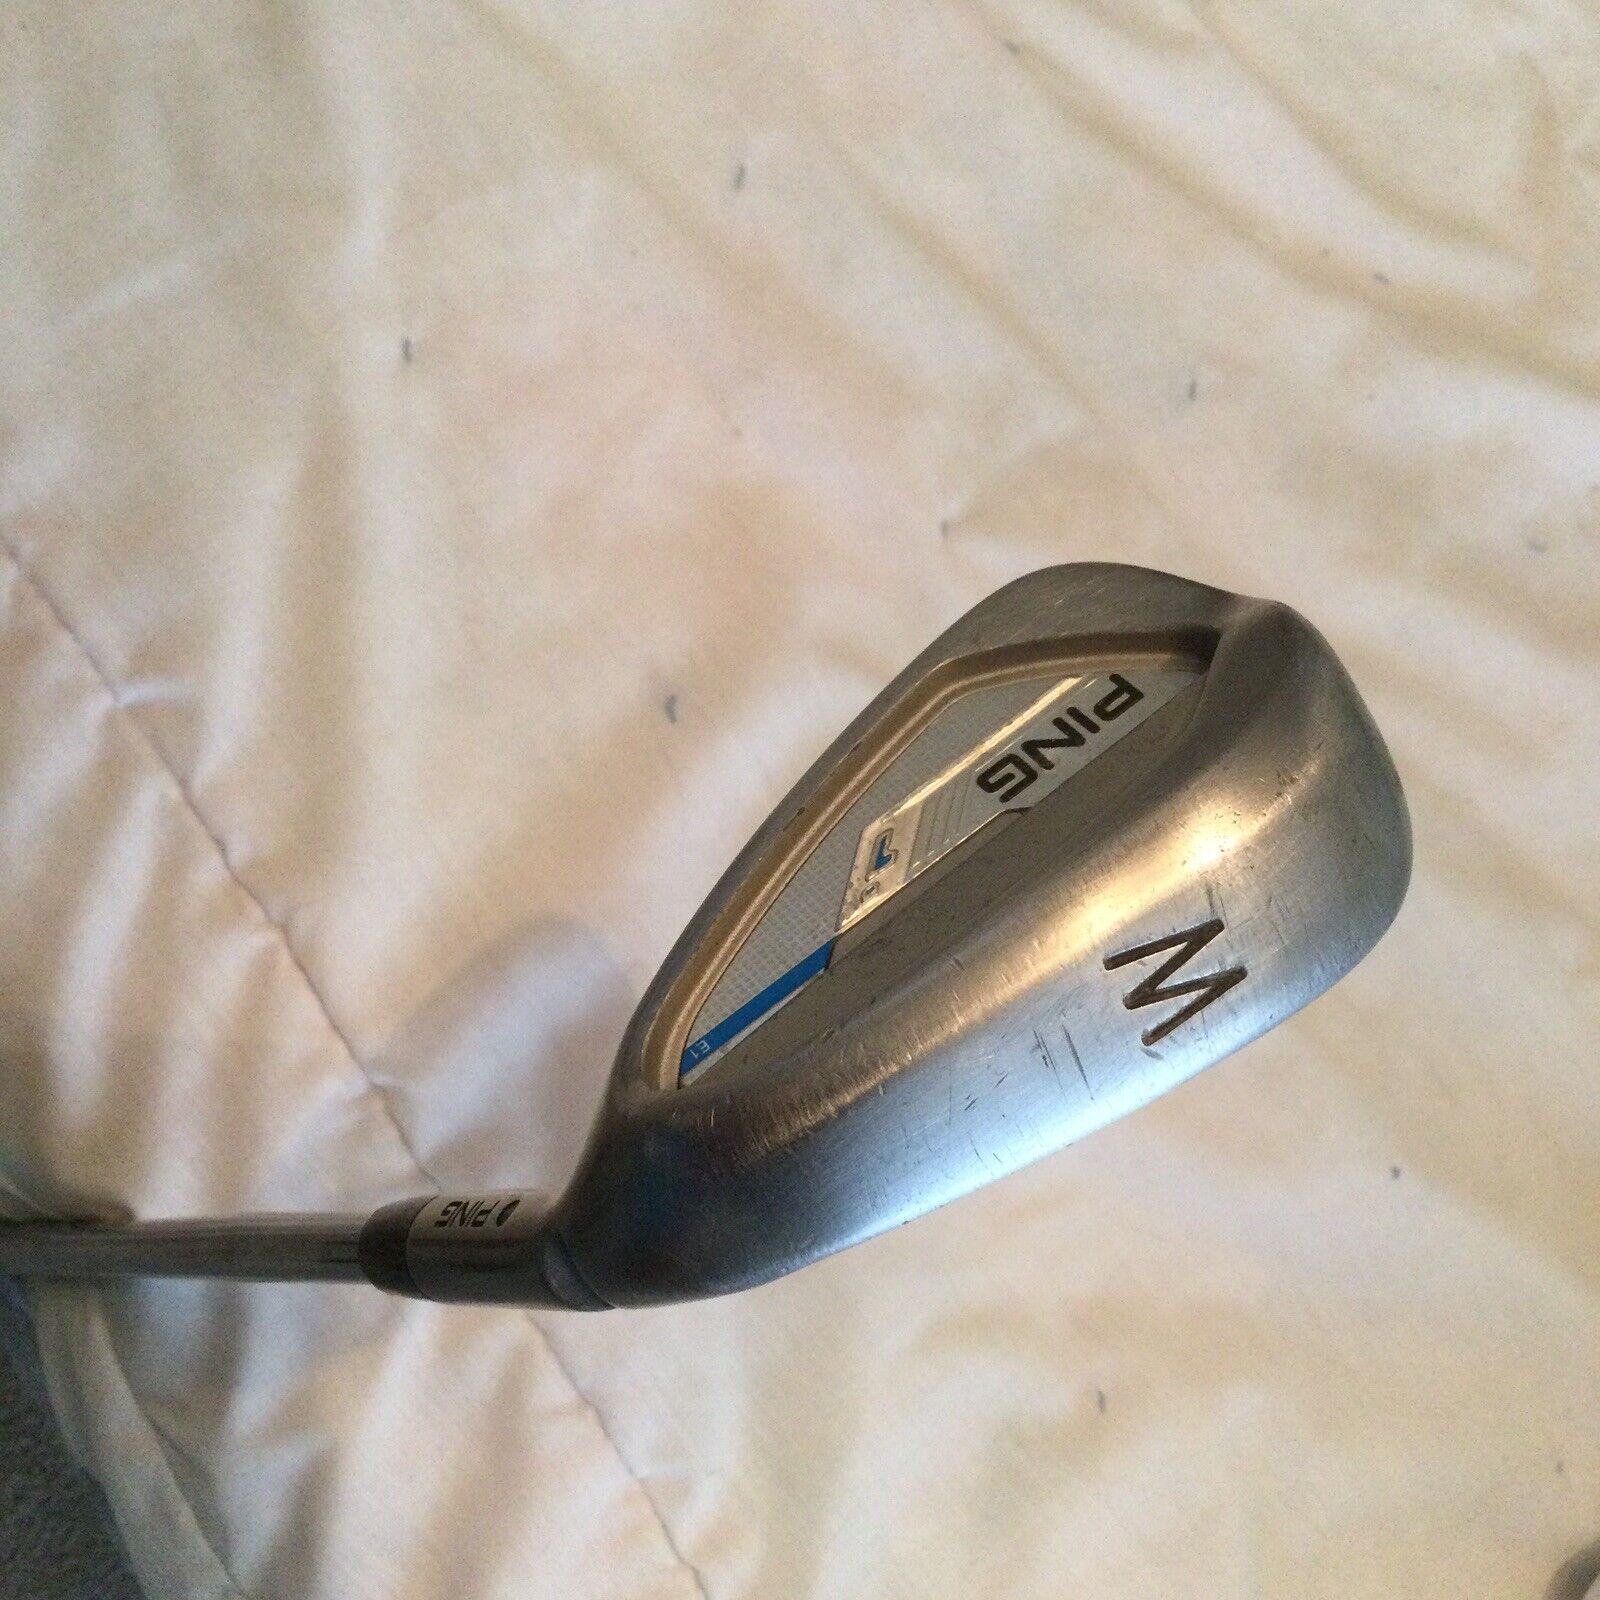 Ping i  E1 Pitching Wedge, Dynamic Gold 105 S300 shaft. Golf Pride 360 Grip.